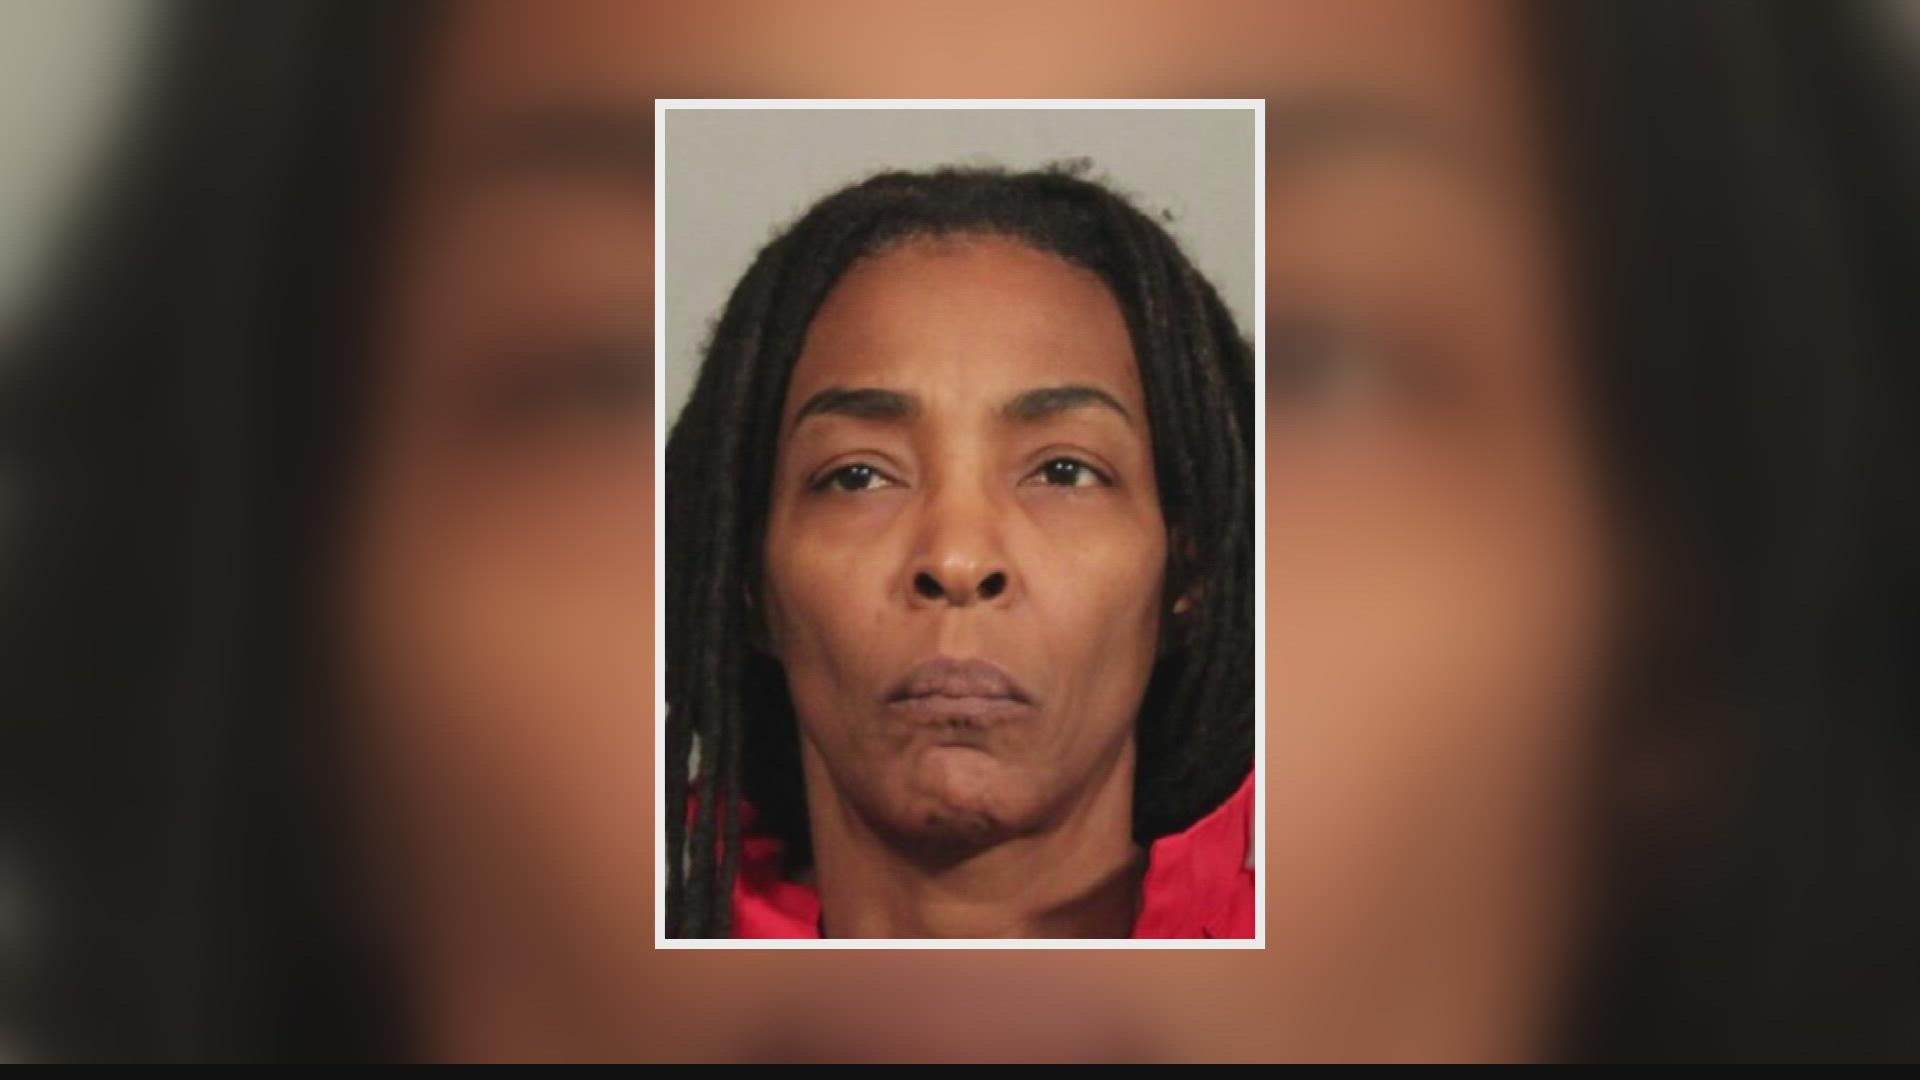 A woman has been charged in the death of a 74-year-old woman on the Westside, according to the Jacksonville Sheriff's Office.